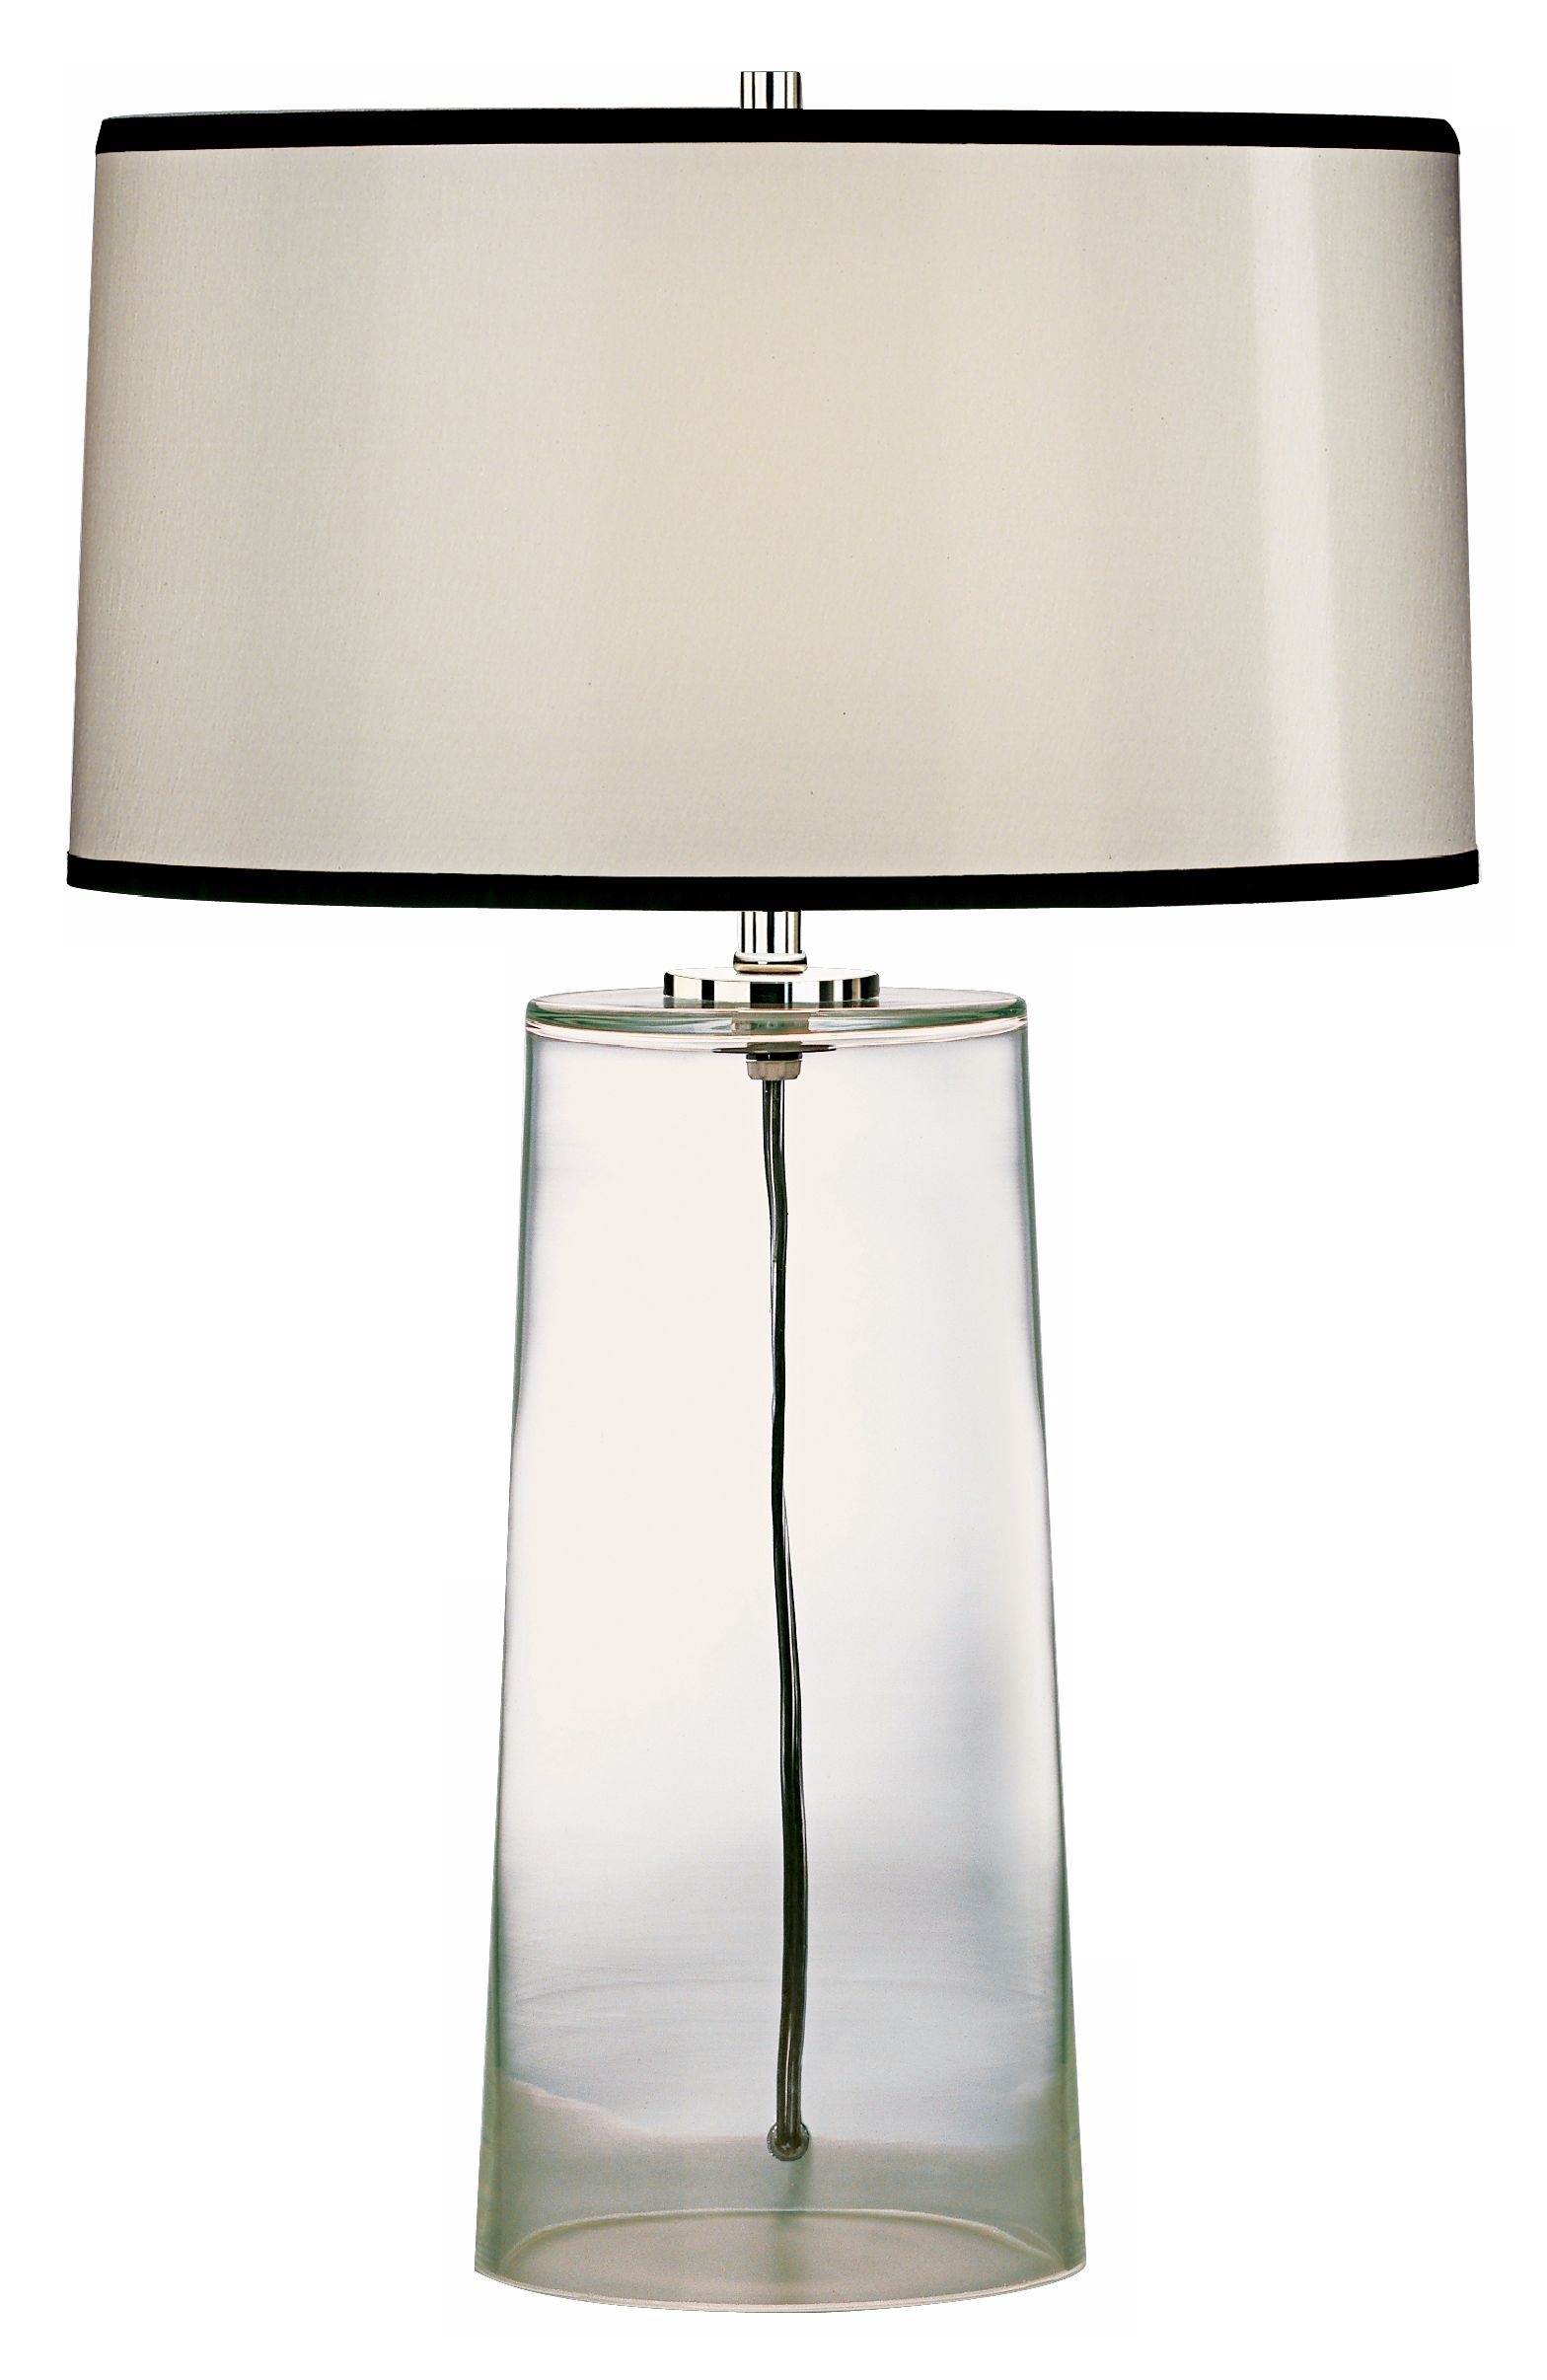 Robert Abbey Clear Glass Base with Black Trim Shade Lamp - Image 0